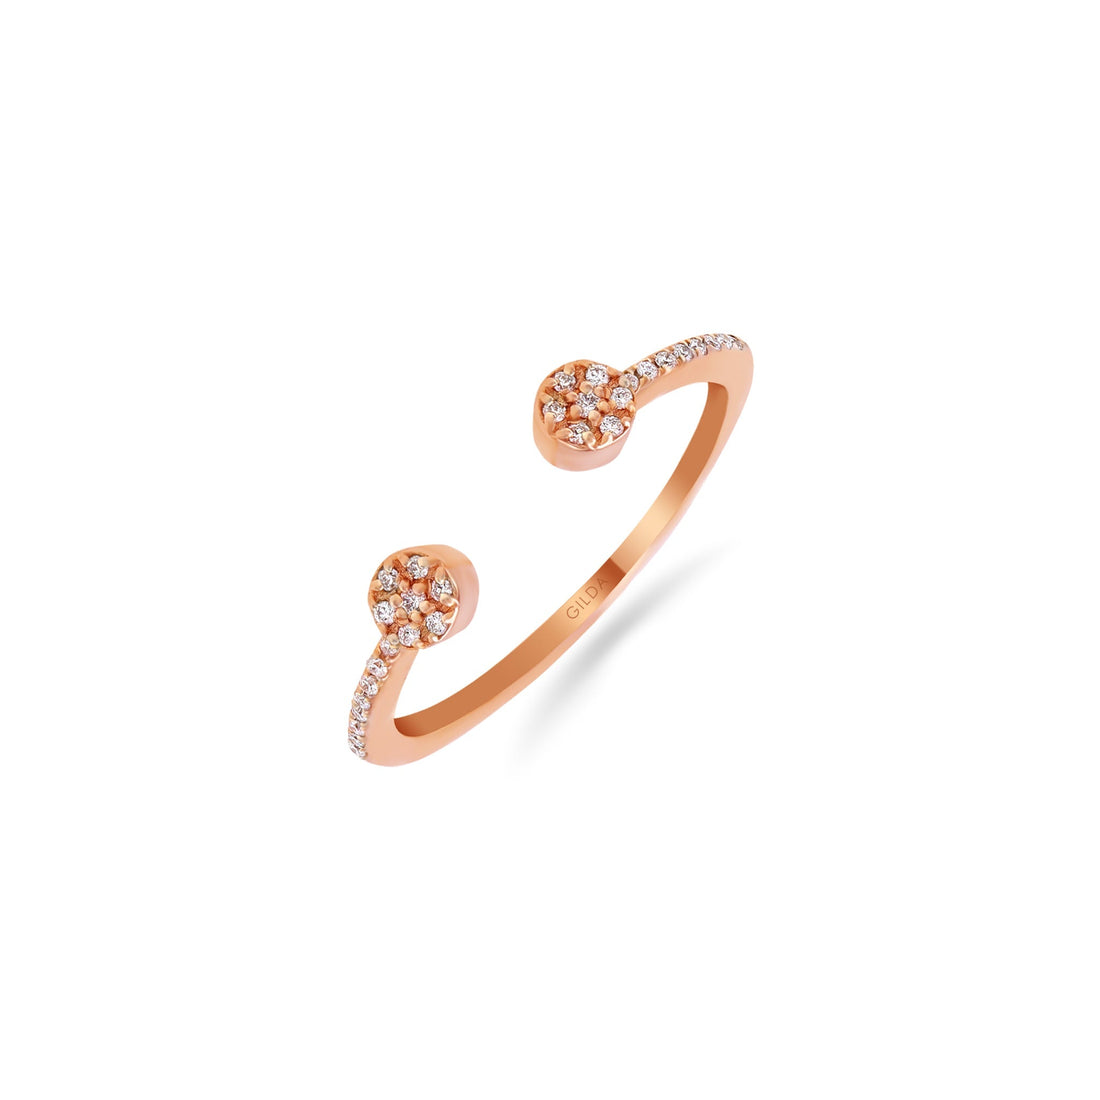 Jewelry Minnies | Diamond Ring | 0.08 Cts. | 14K Gold - Rose / 6 / Diamonds - ring Zengoda Shop online from